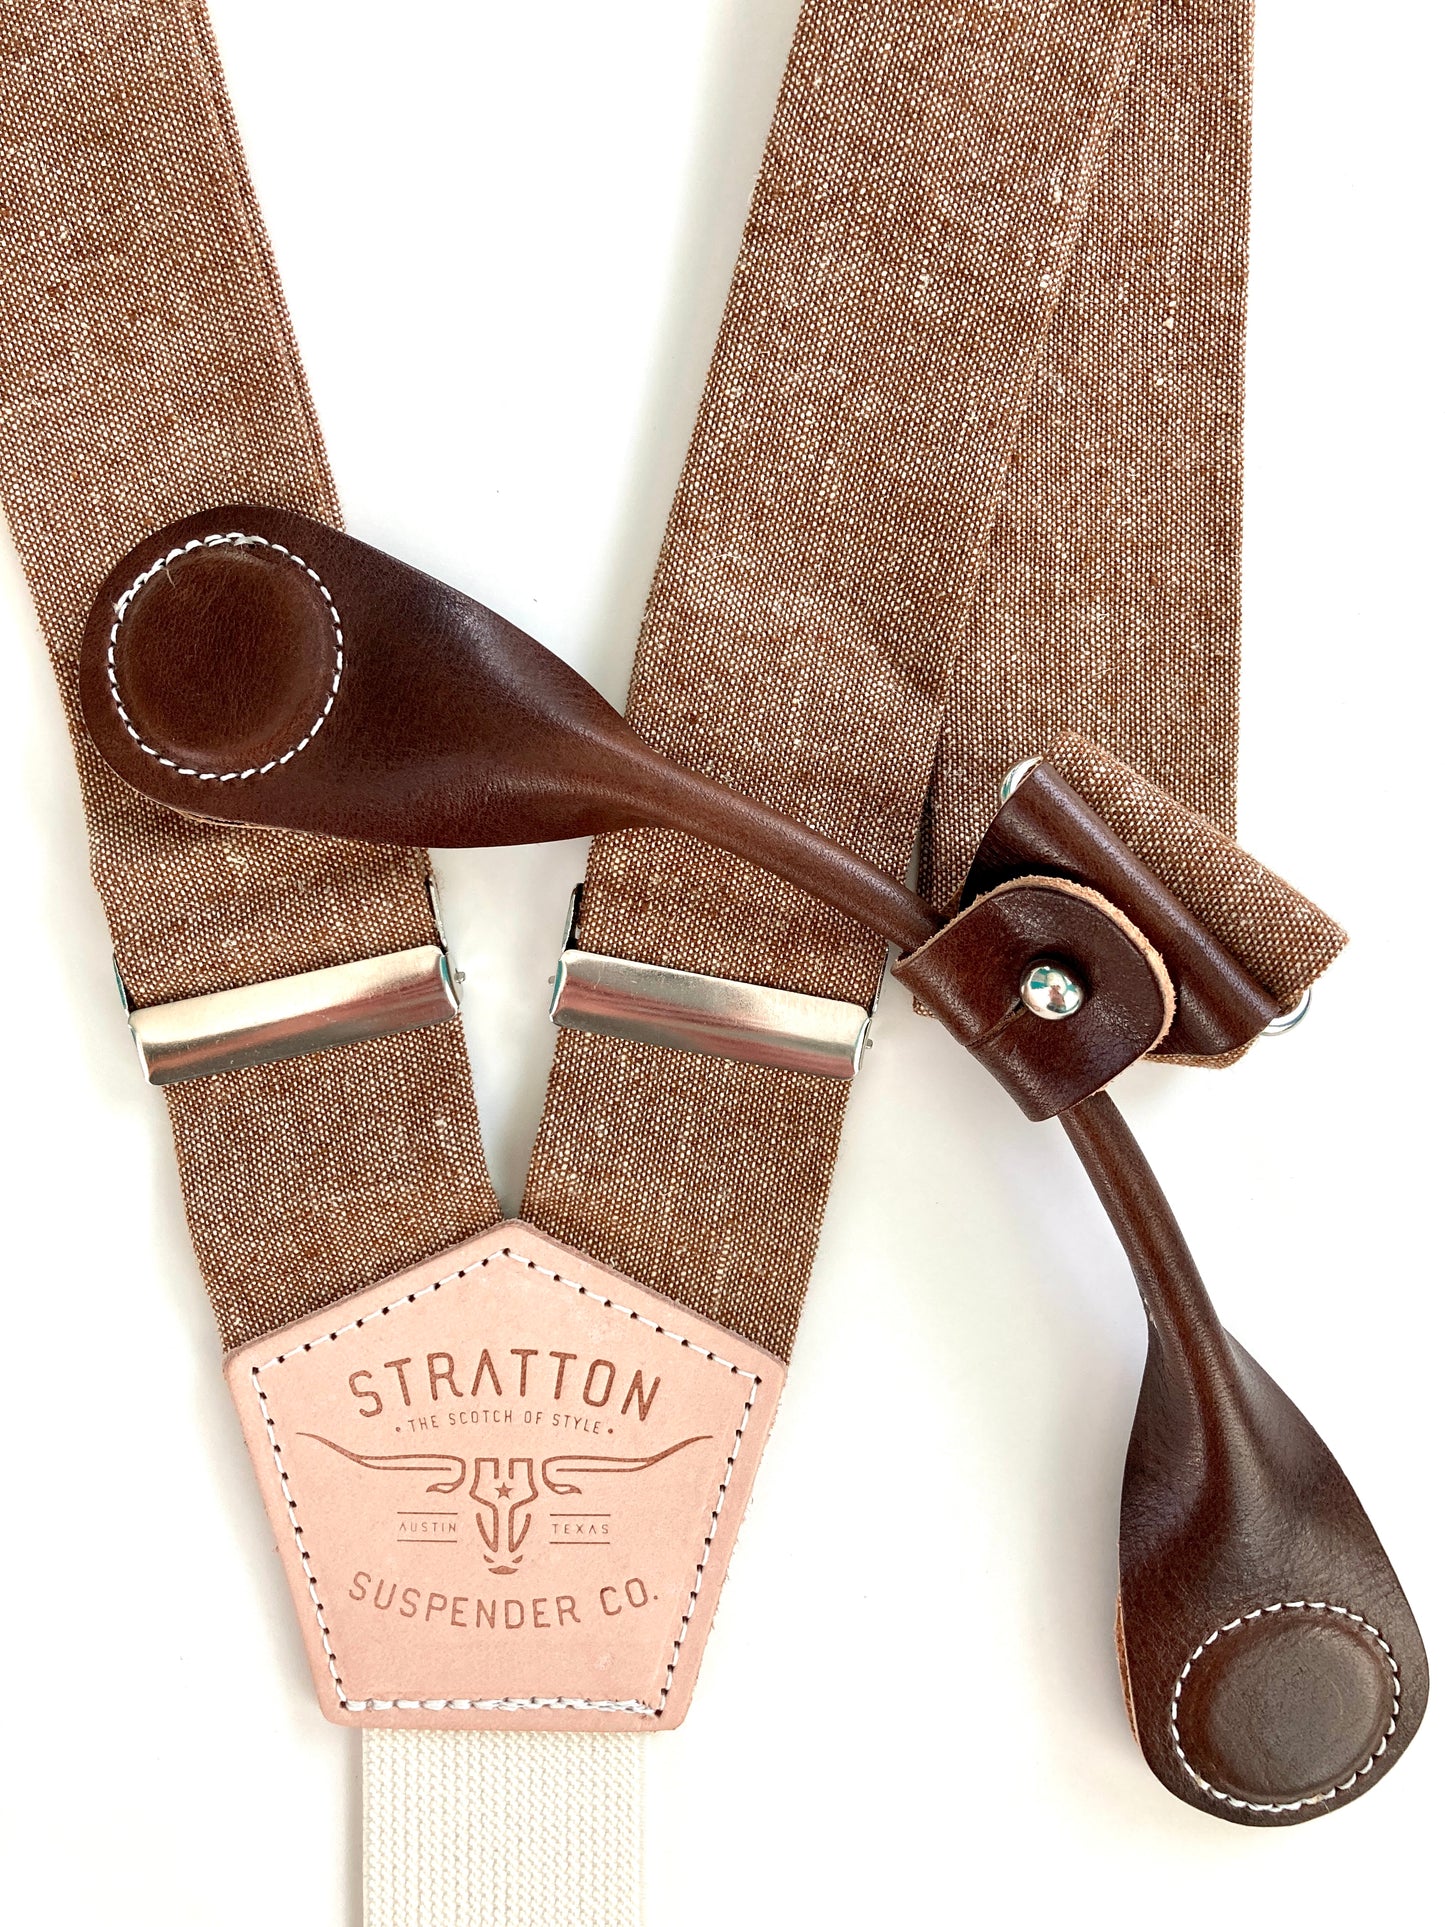 Stratton Suspender Co. features the Nutmeg (brown) linen suspenders on veg tan shoulder leather with cream colored elastic back strap for the Fall 2022 suspenders collection Magnetic Stratton Suspender clasps in Chocolate Pontedero Italian leather hand-picked by Stratton Suspender Co.